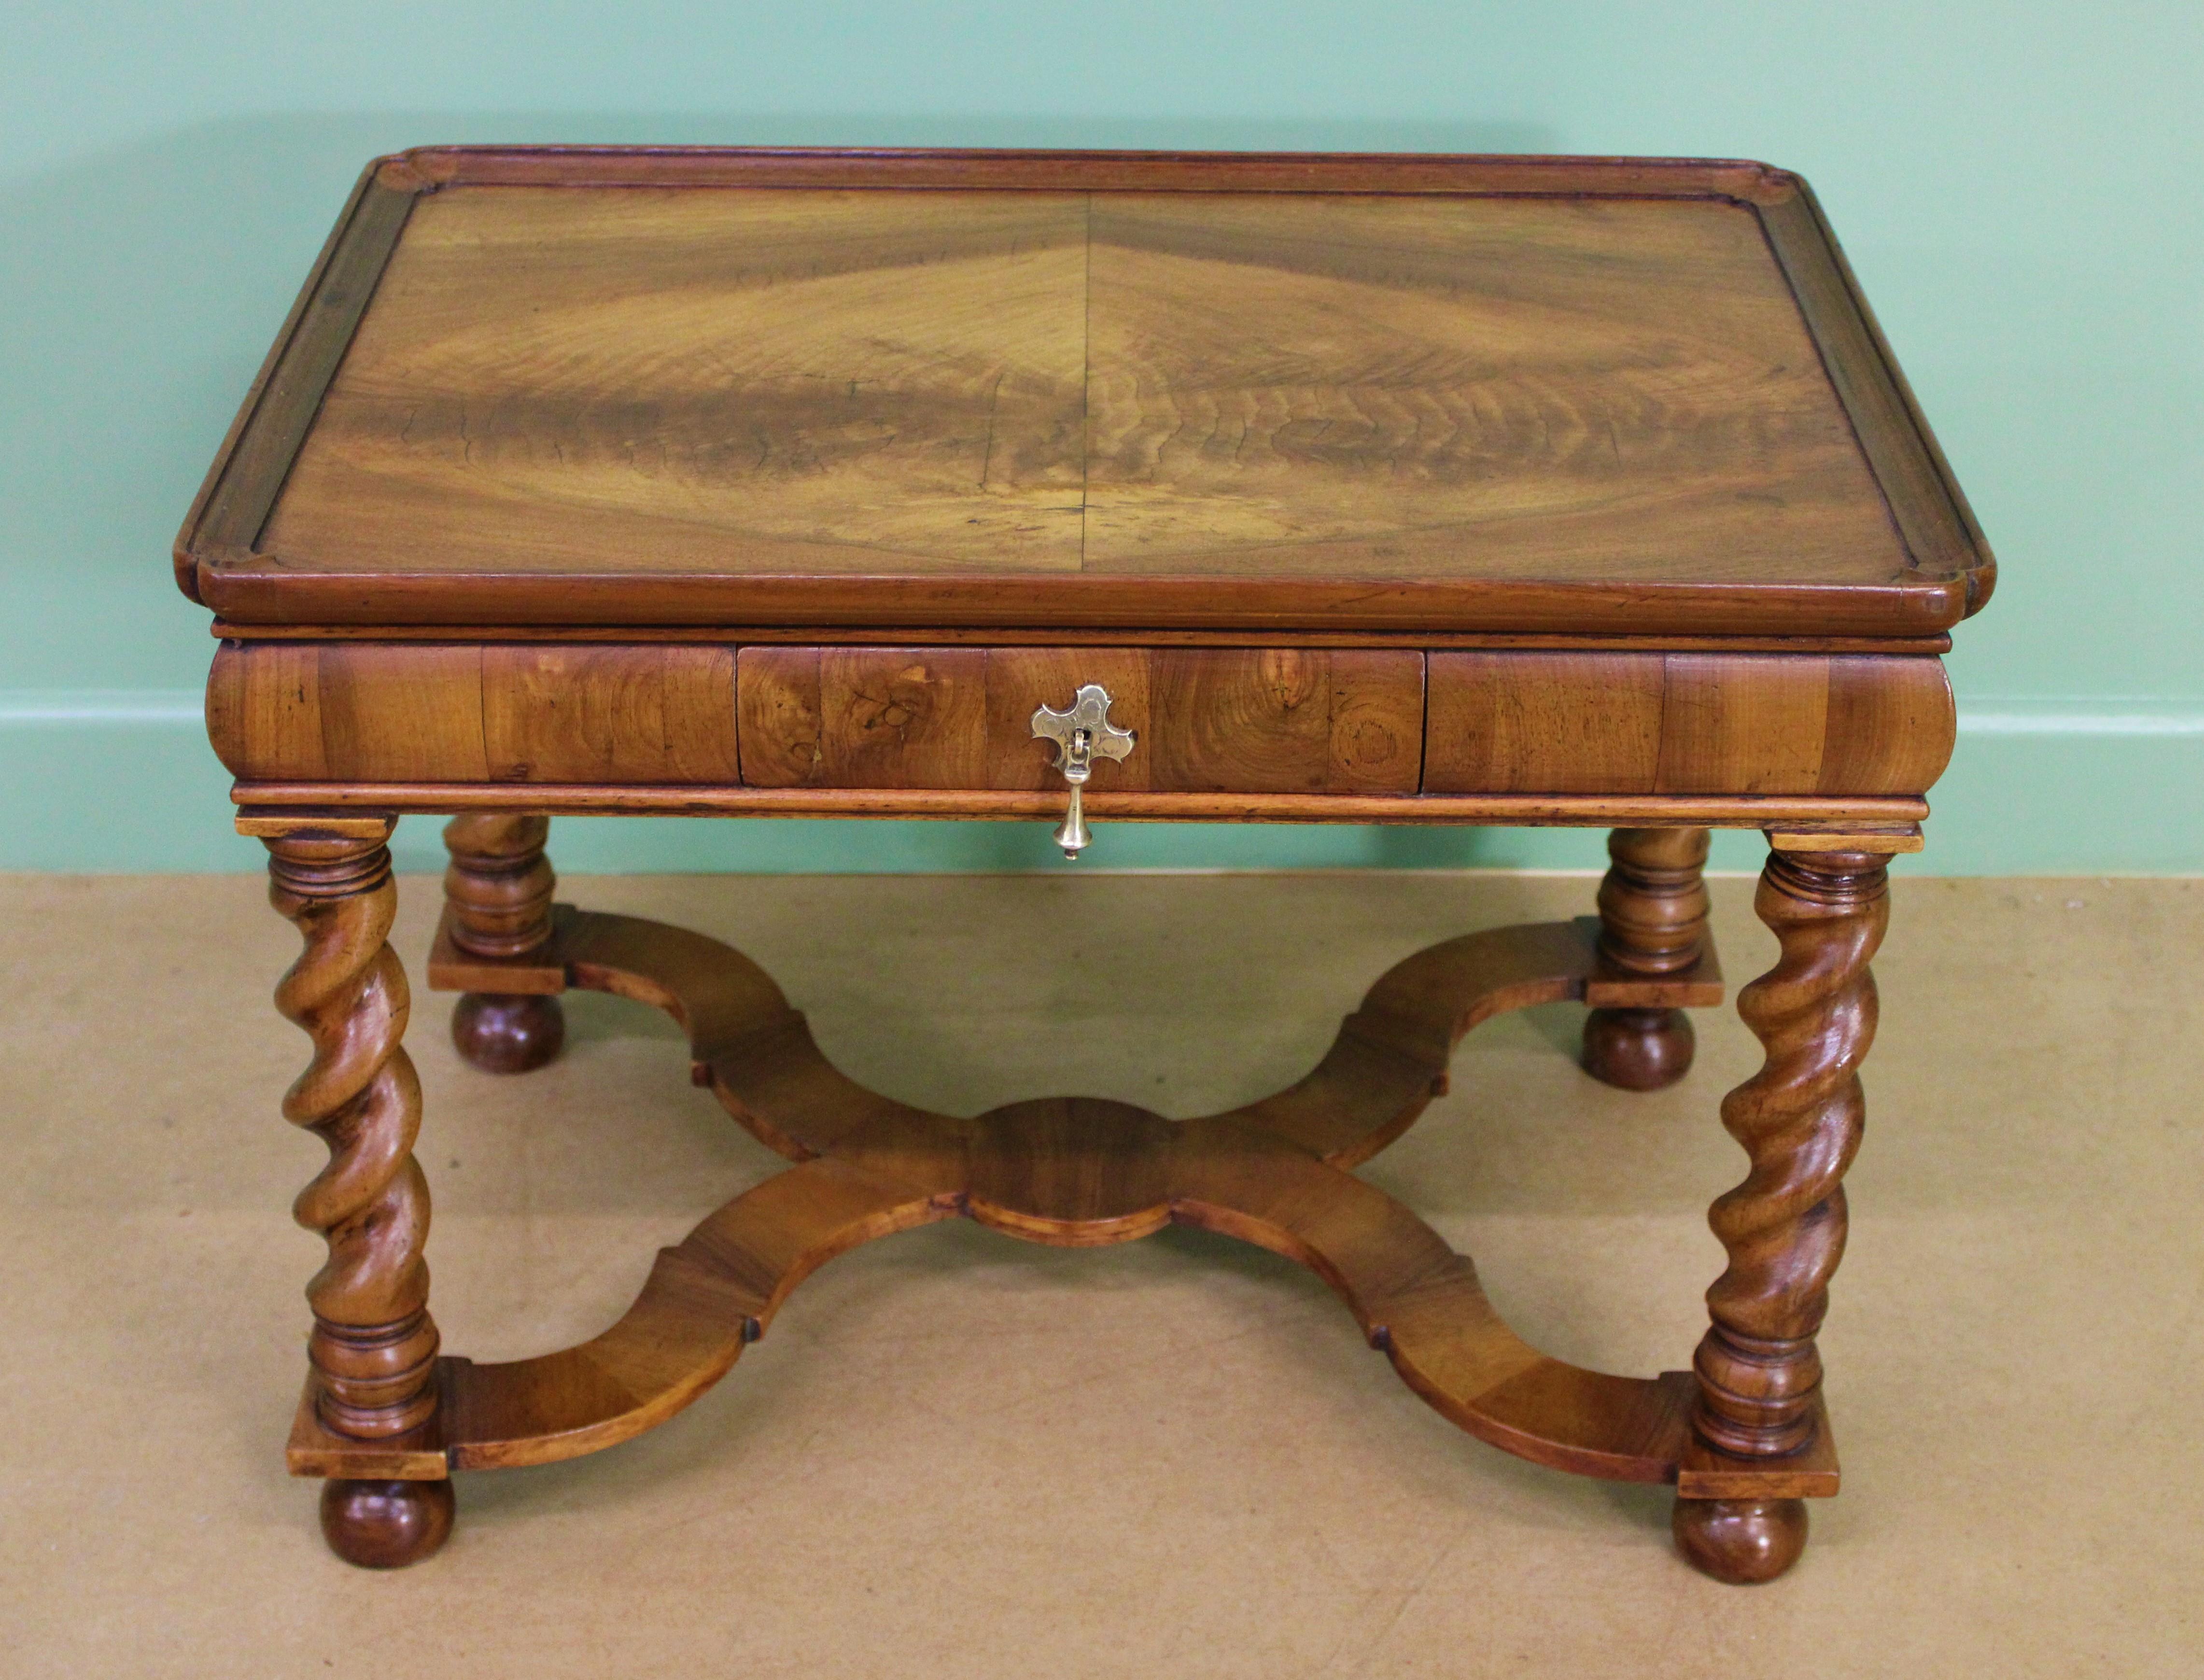 A charming burr walnut coffee table in the William and Mary style. Very well constructed in solid walnut and attractive burr walnut veneers. With a drawer to the freeze, fitted with its original solid brass handle. Standing on barley twist legs,